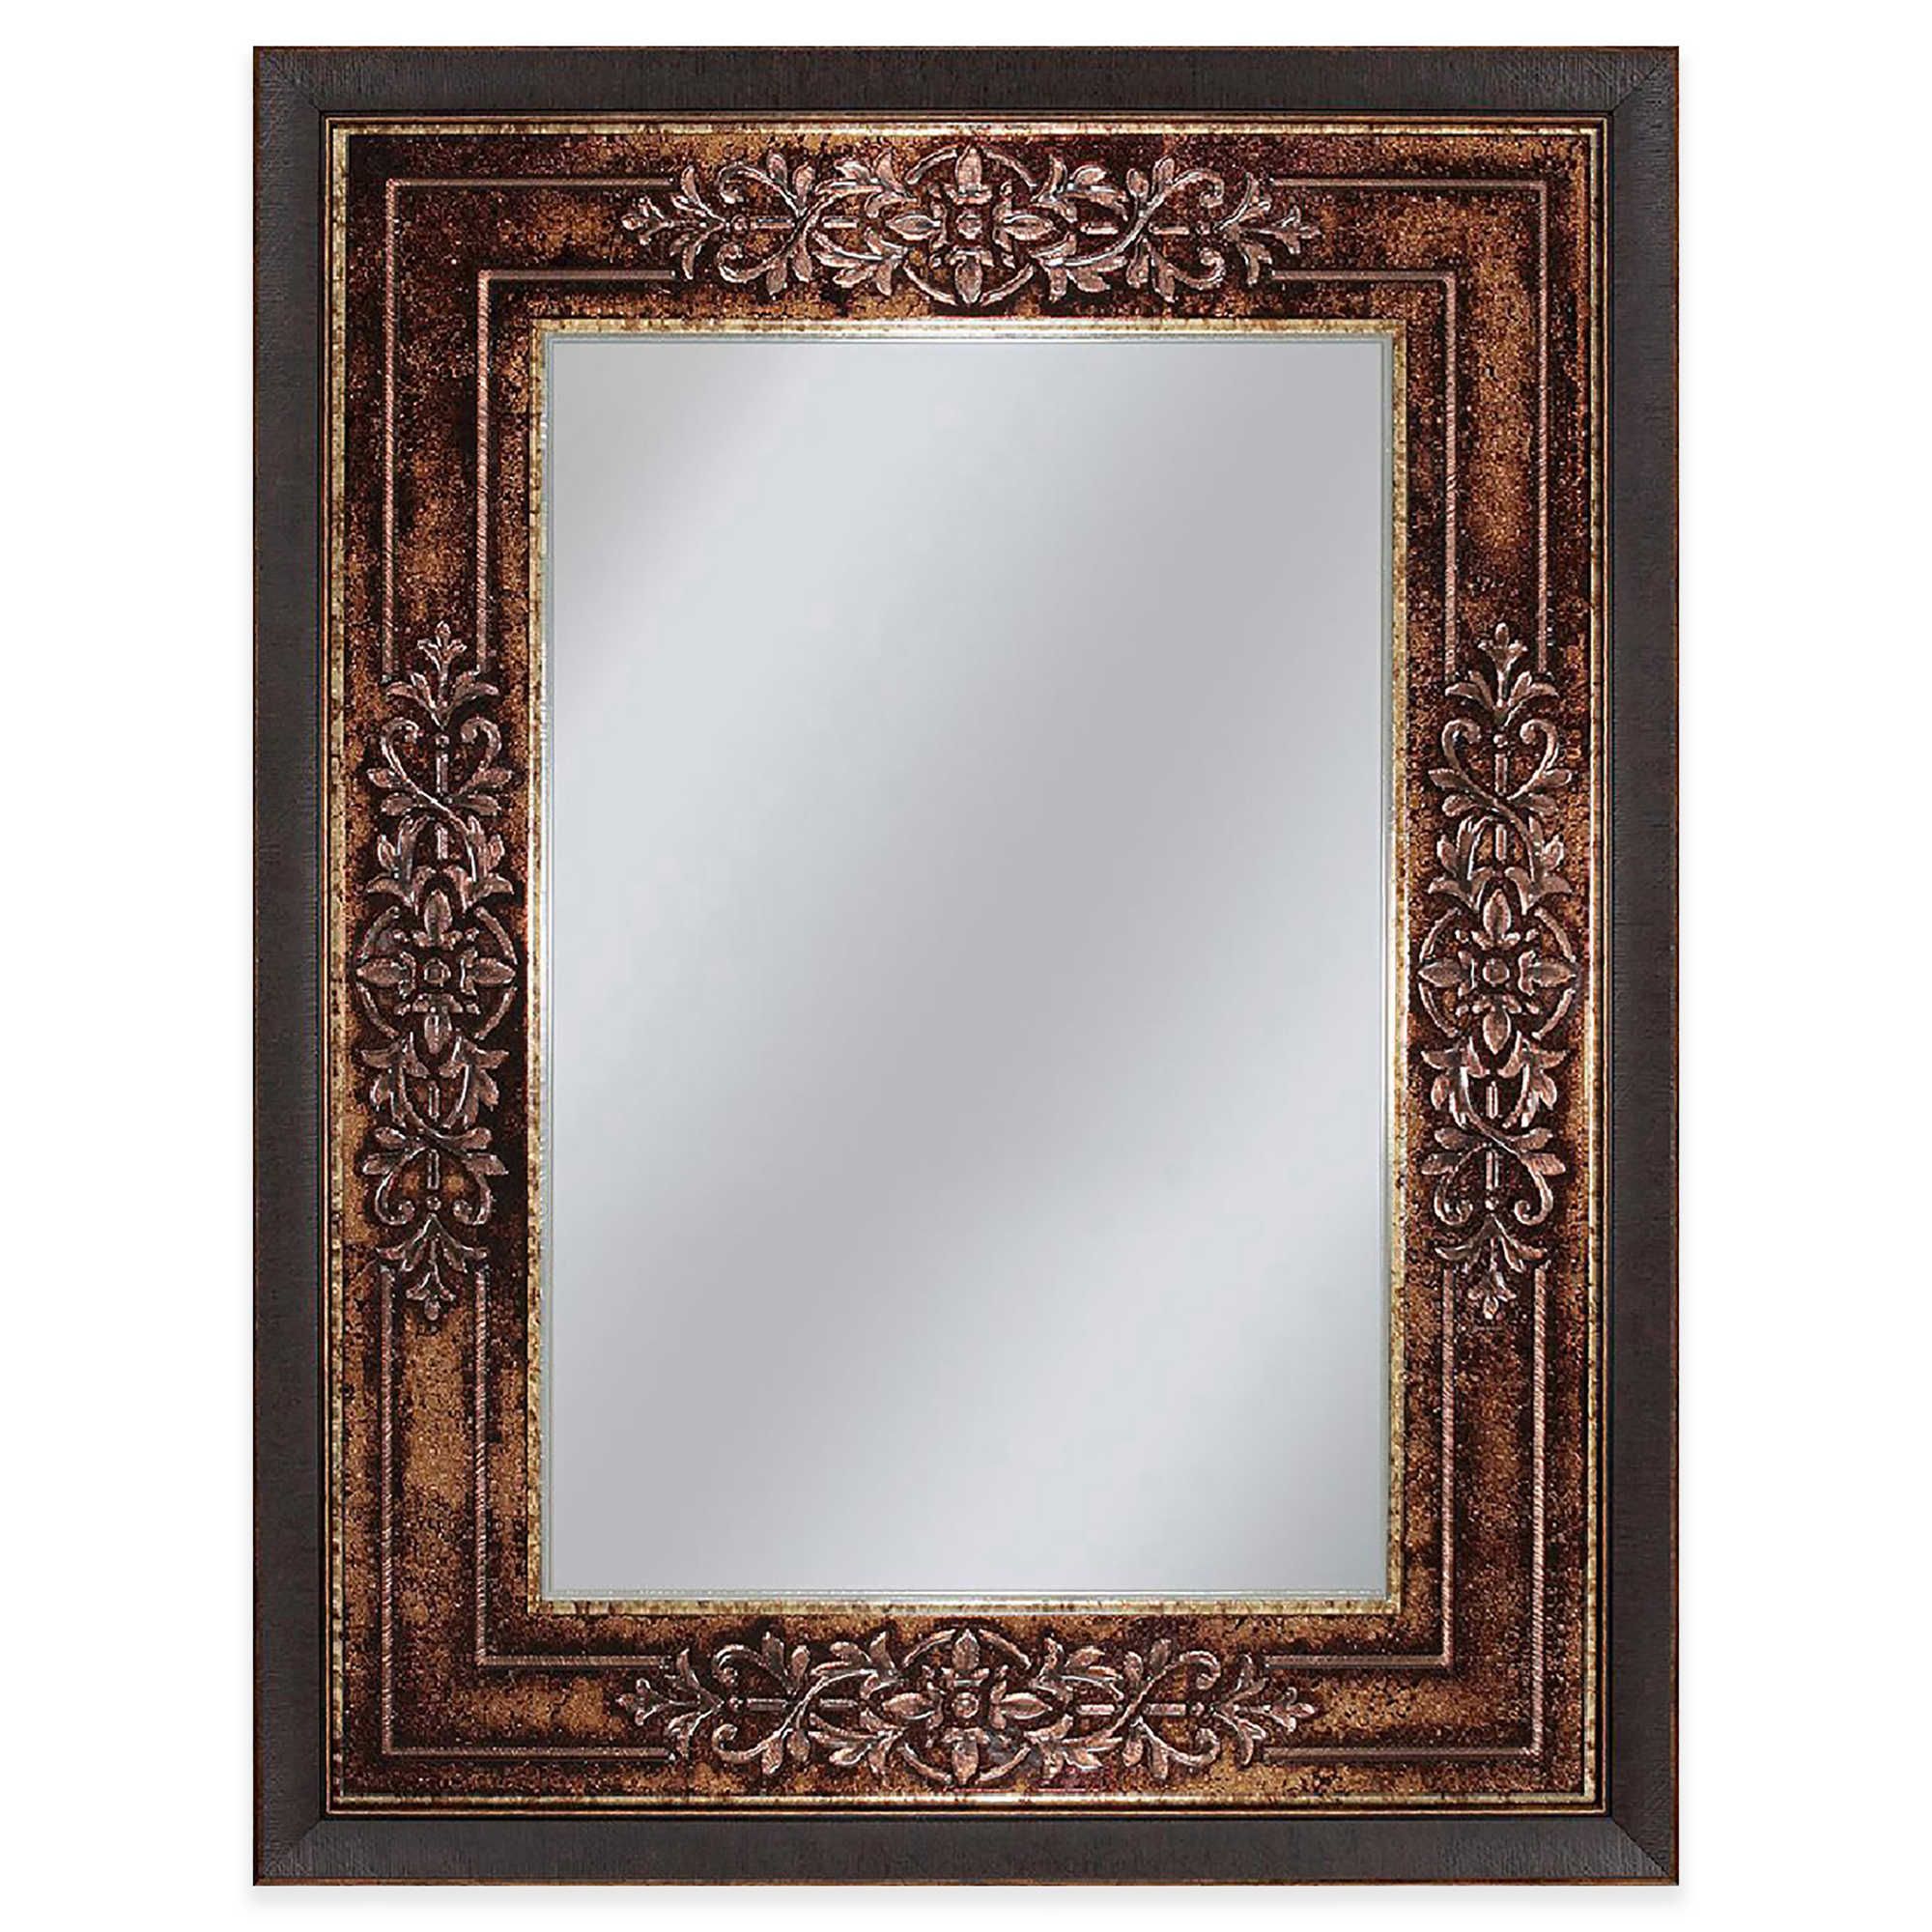 Genoa 27 Inch X 33 Inch Mirror In Bronze | Mirror Wall, Framed Mirror Throughout Bronze Wall Mirrors (View 1 of 15)